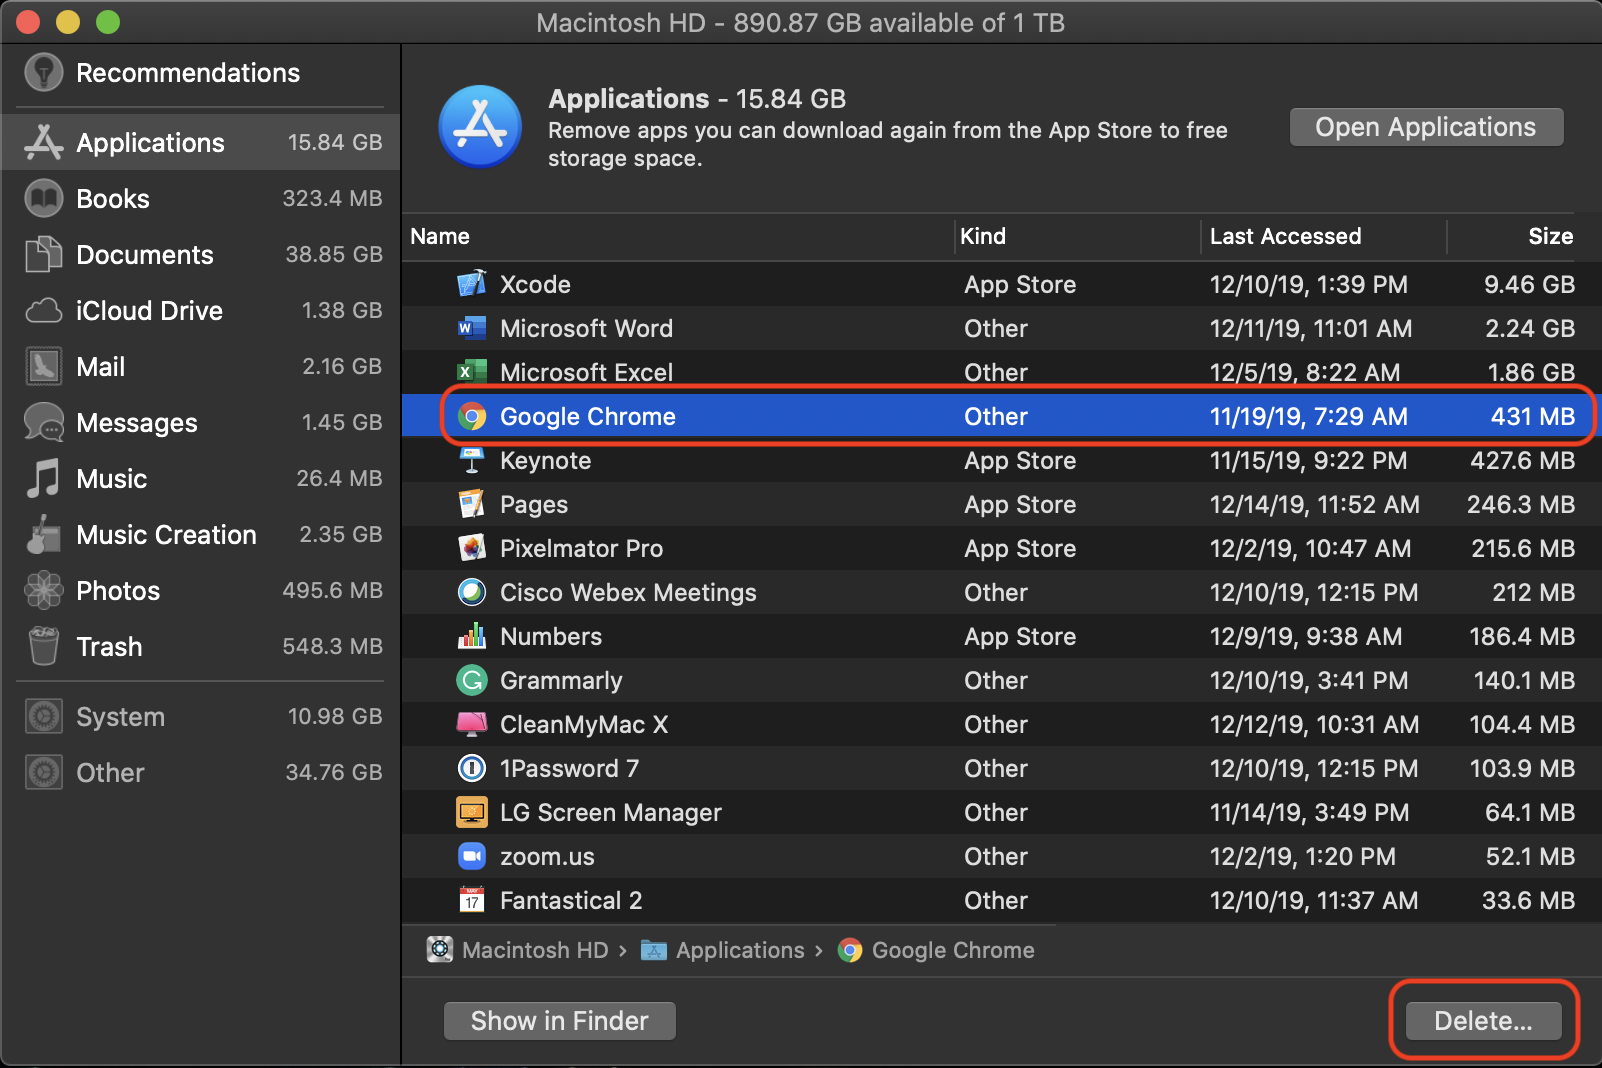 Delete Google Chrome utility from Finder